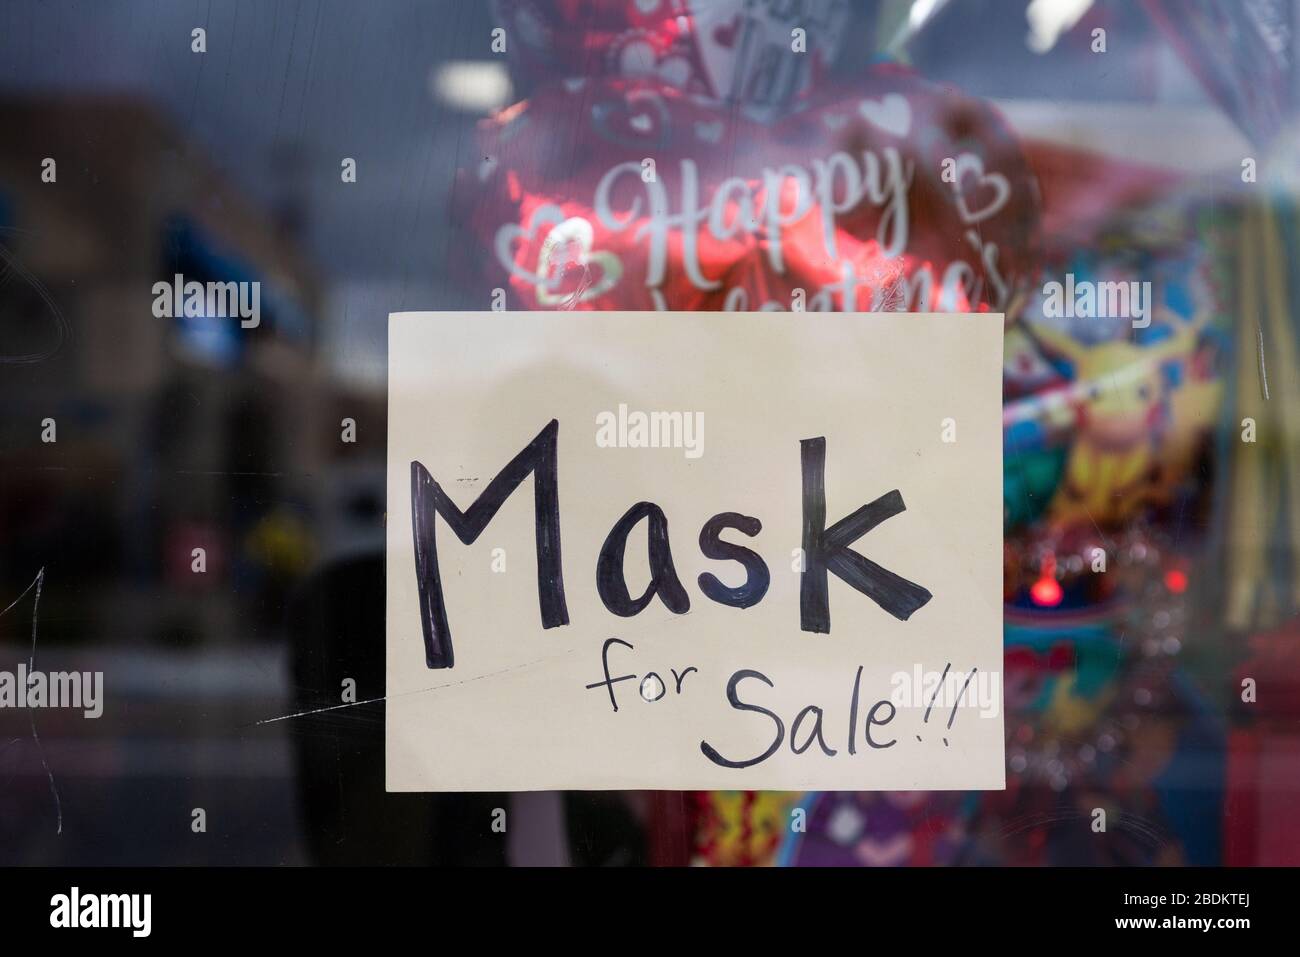 Sign in dollar store window during Covid-19 outbreak, that reads: Mask For Sale!. In Los Angeles, California. Stock Photo